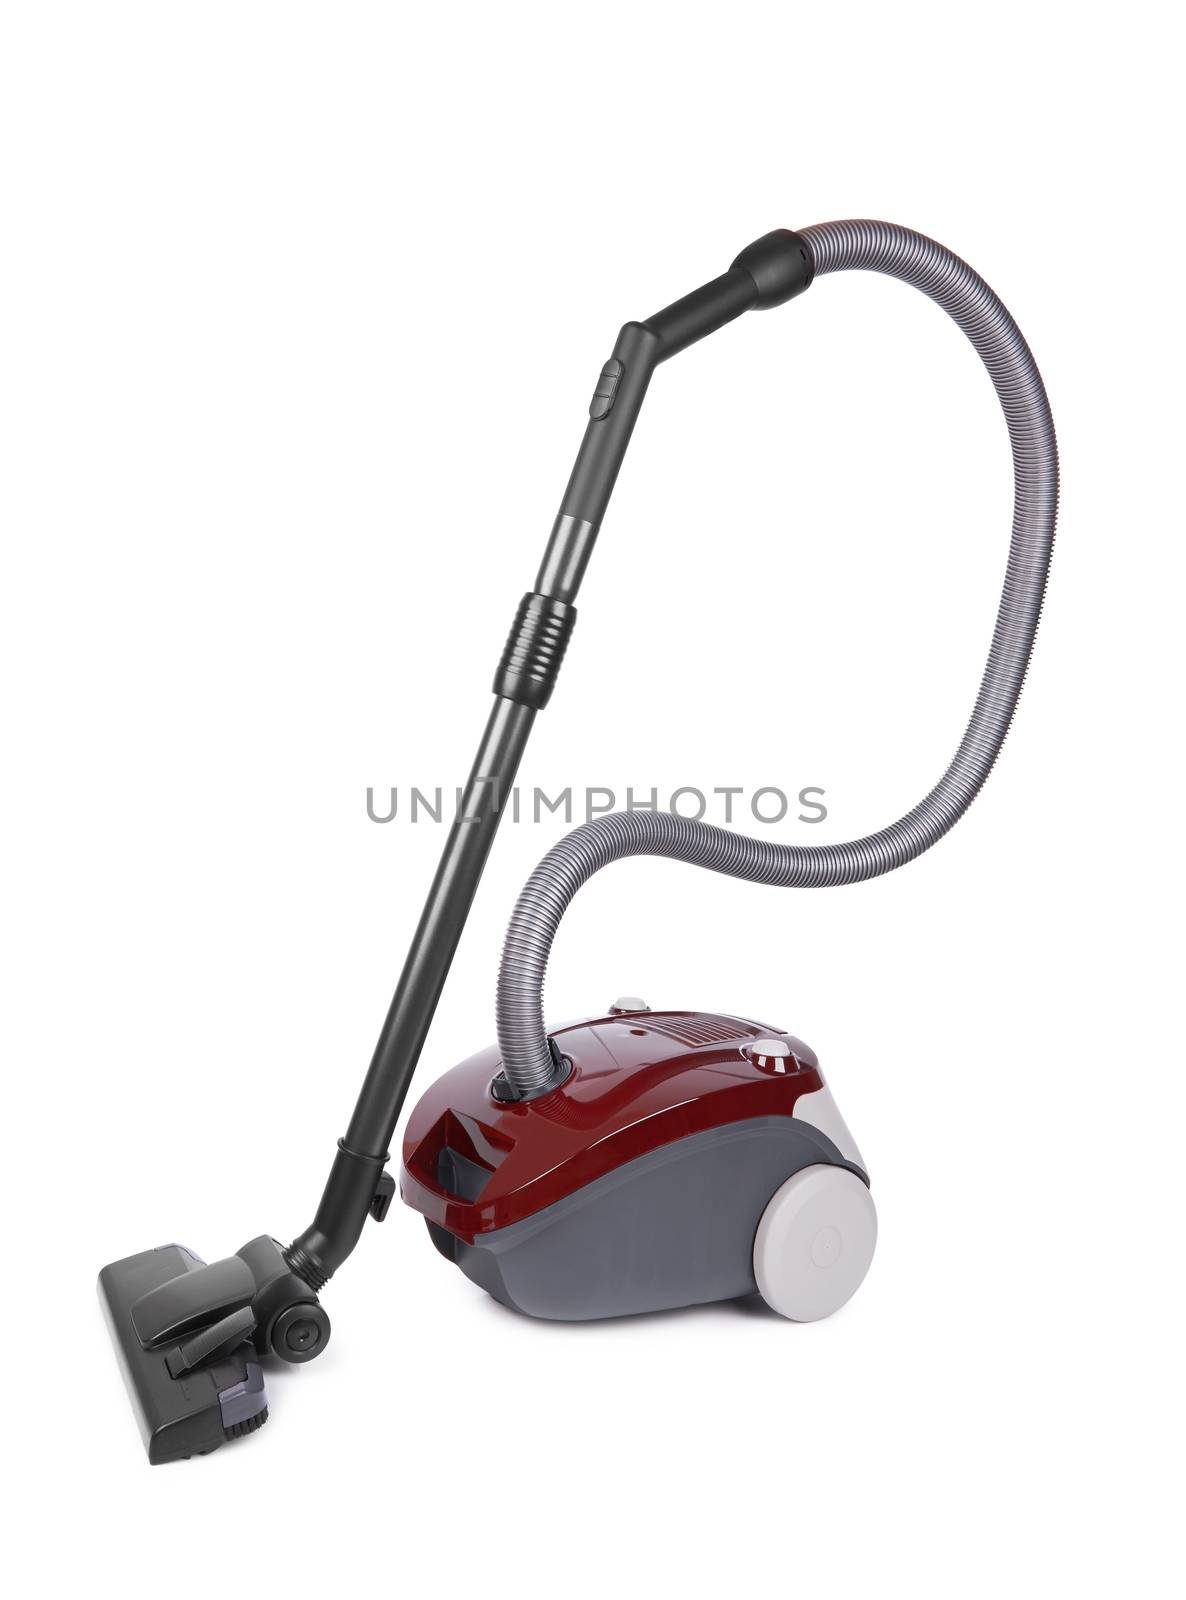 Vacuum cleaner isolated on a white background